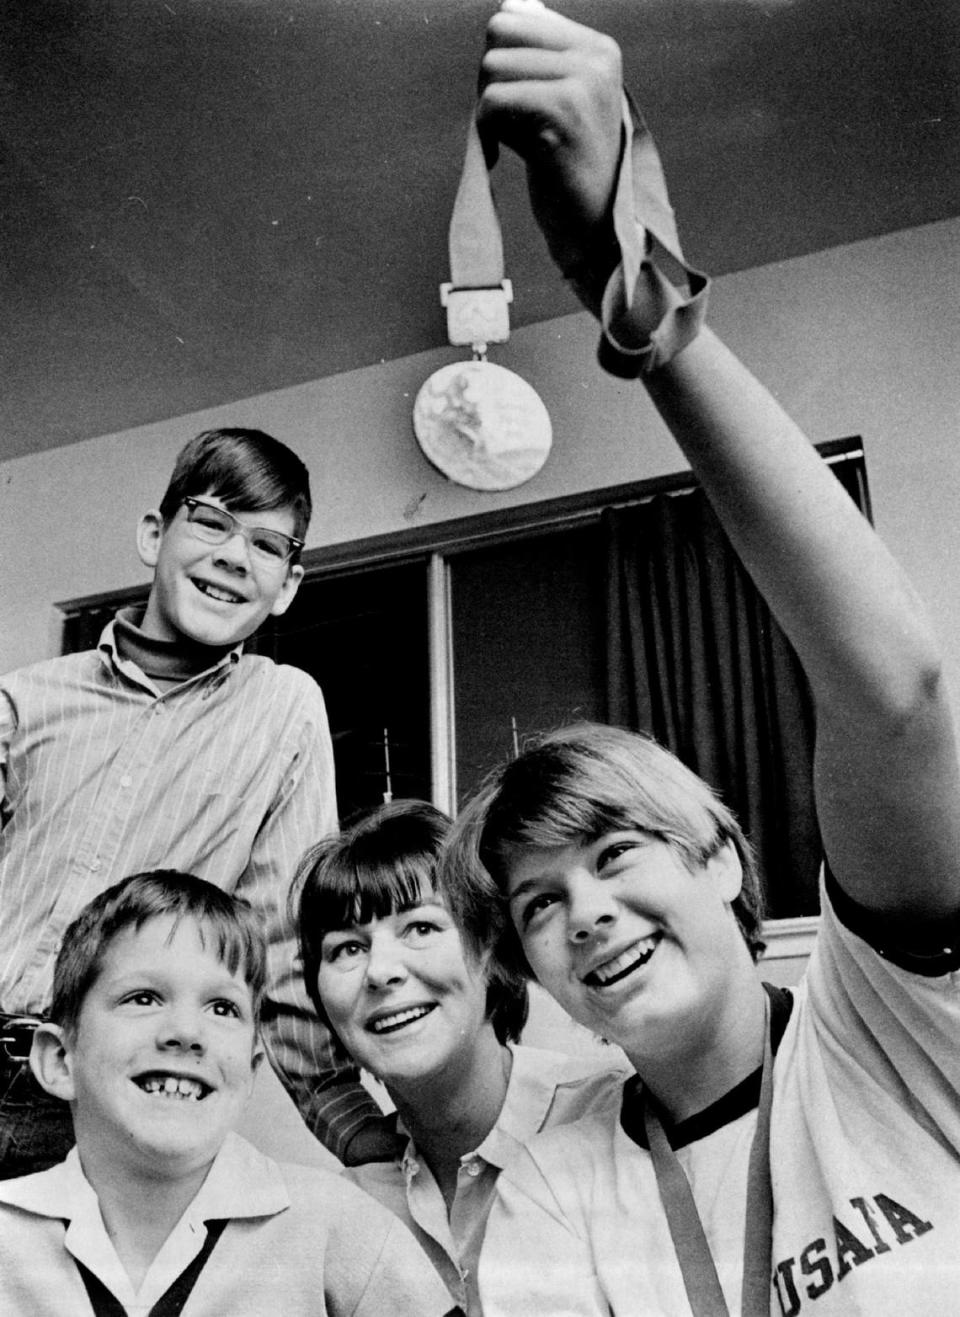 Sacramento’s Debbie Meyer, celebrating being named winner of the James E. Sullivan Memorial Award as America’s amateur athlete of 1968, holds up an Olympic gold medal and wears another. The third one she gave to her coach, Sherm Chavoor. With Debbie in her home are her mother Betty and brothers Jeff, 12, above, and Carl, 8.